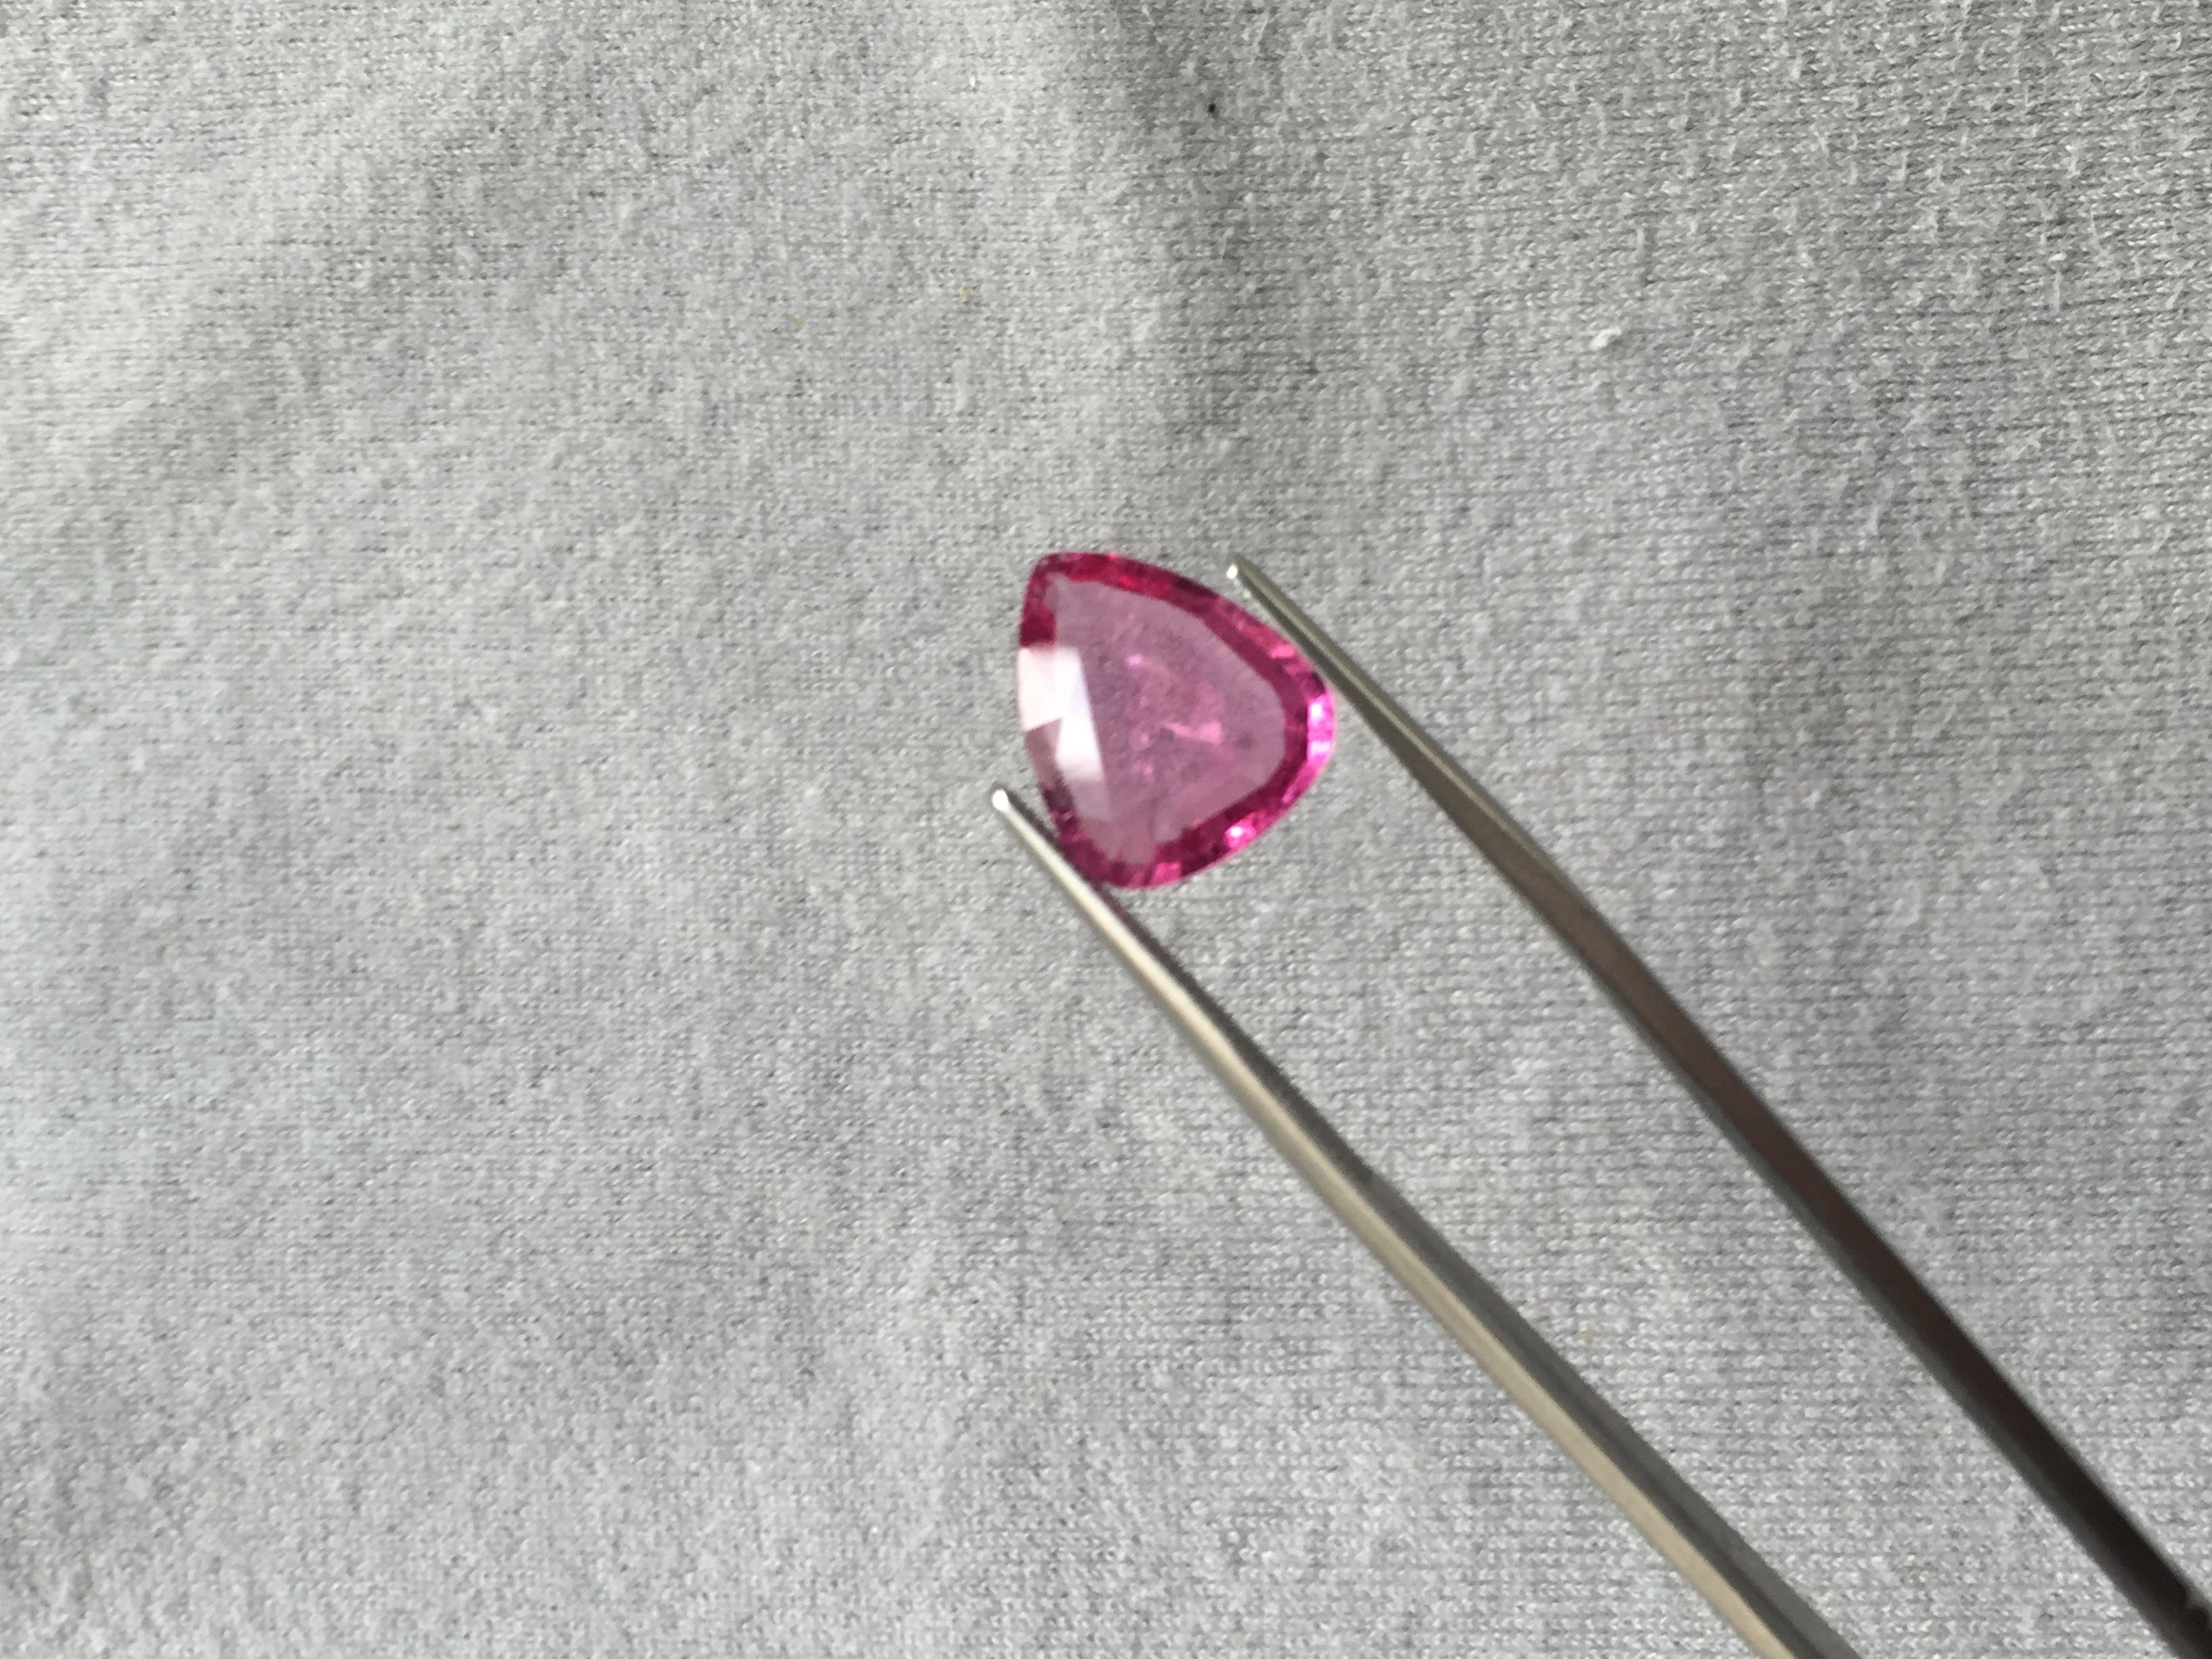 Introducing our exquisite 3.76 Carat Pink Tourmaline Pear Cut, the perfect gemstone for high-end jewelry. Crafted from high-quality tourmaline, this stunning gemstone features a gorgeous pink hue that is both elegant and sophisticated. The pear cut